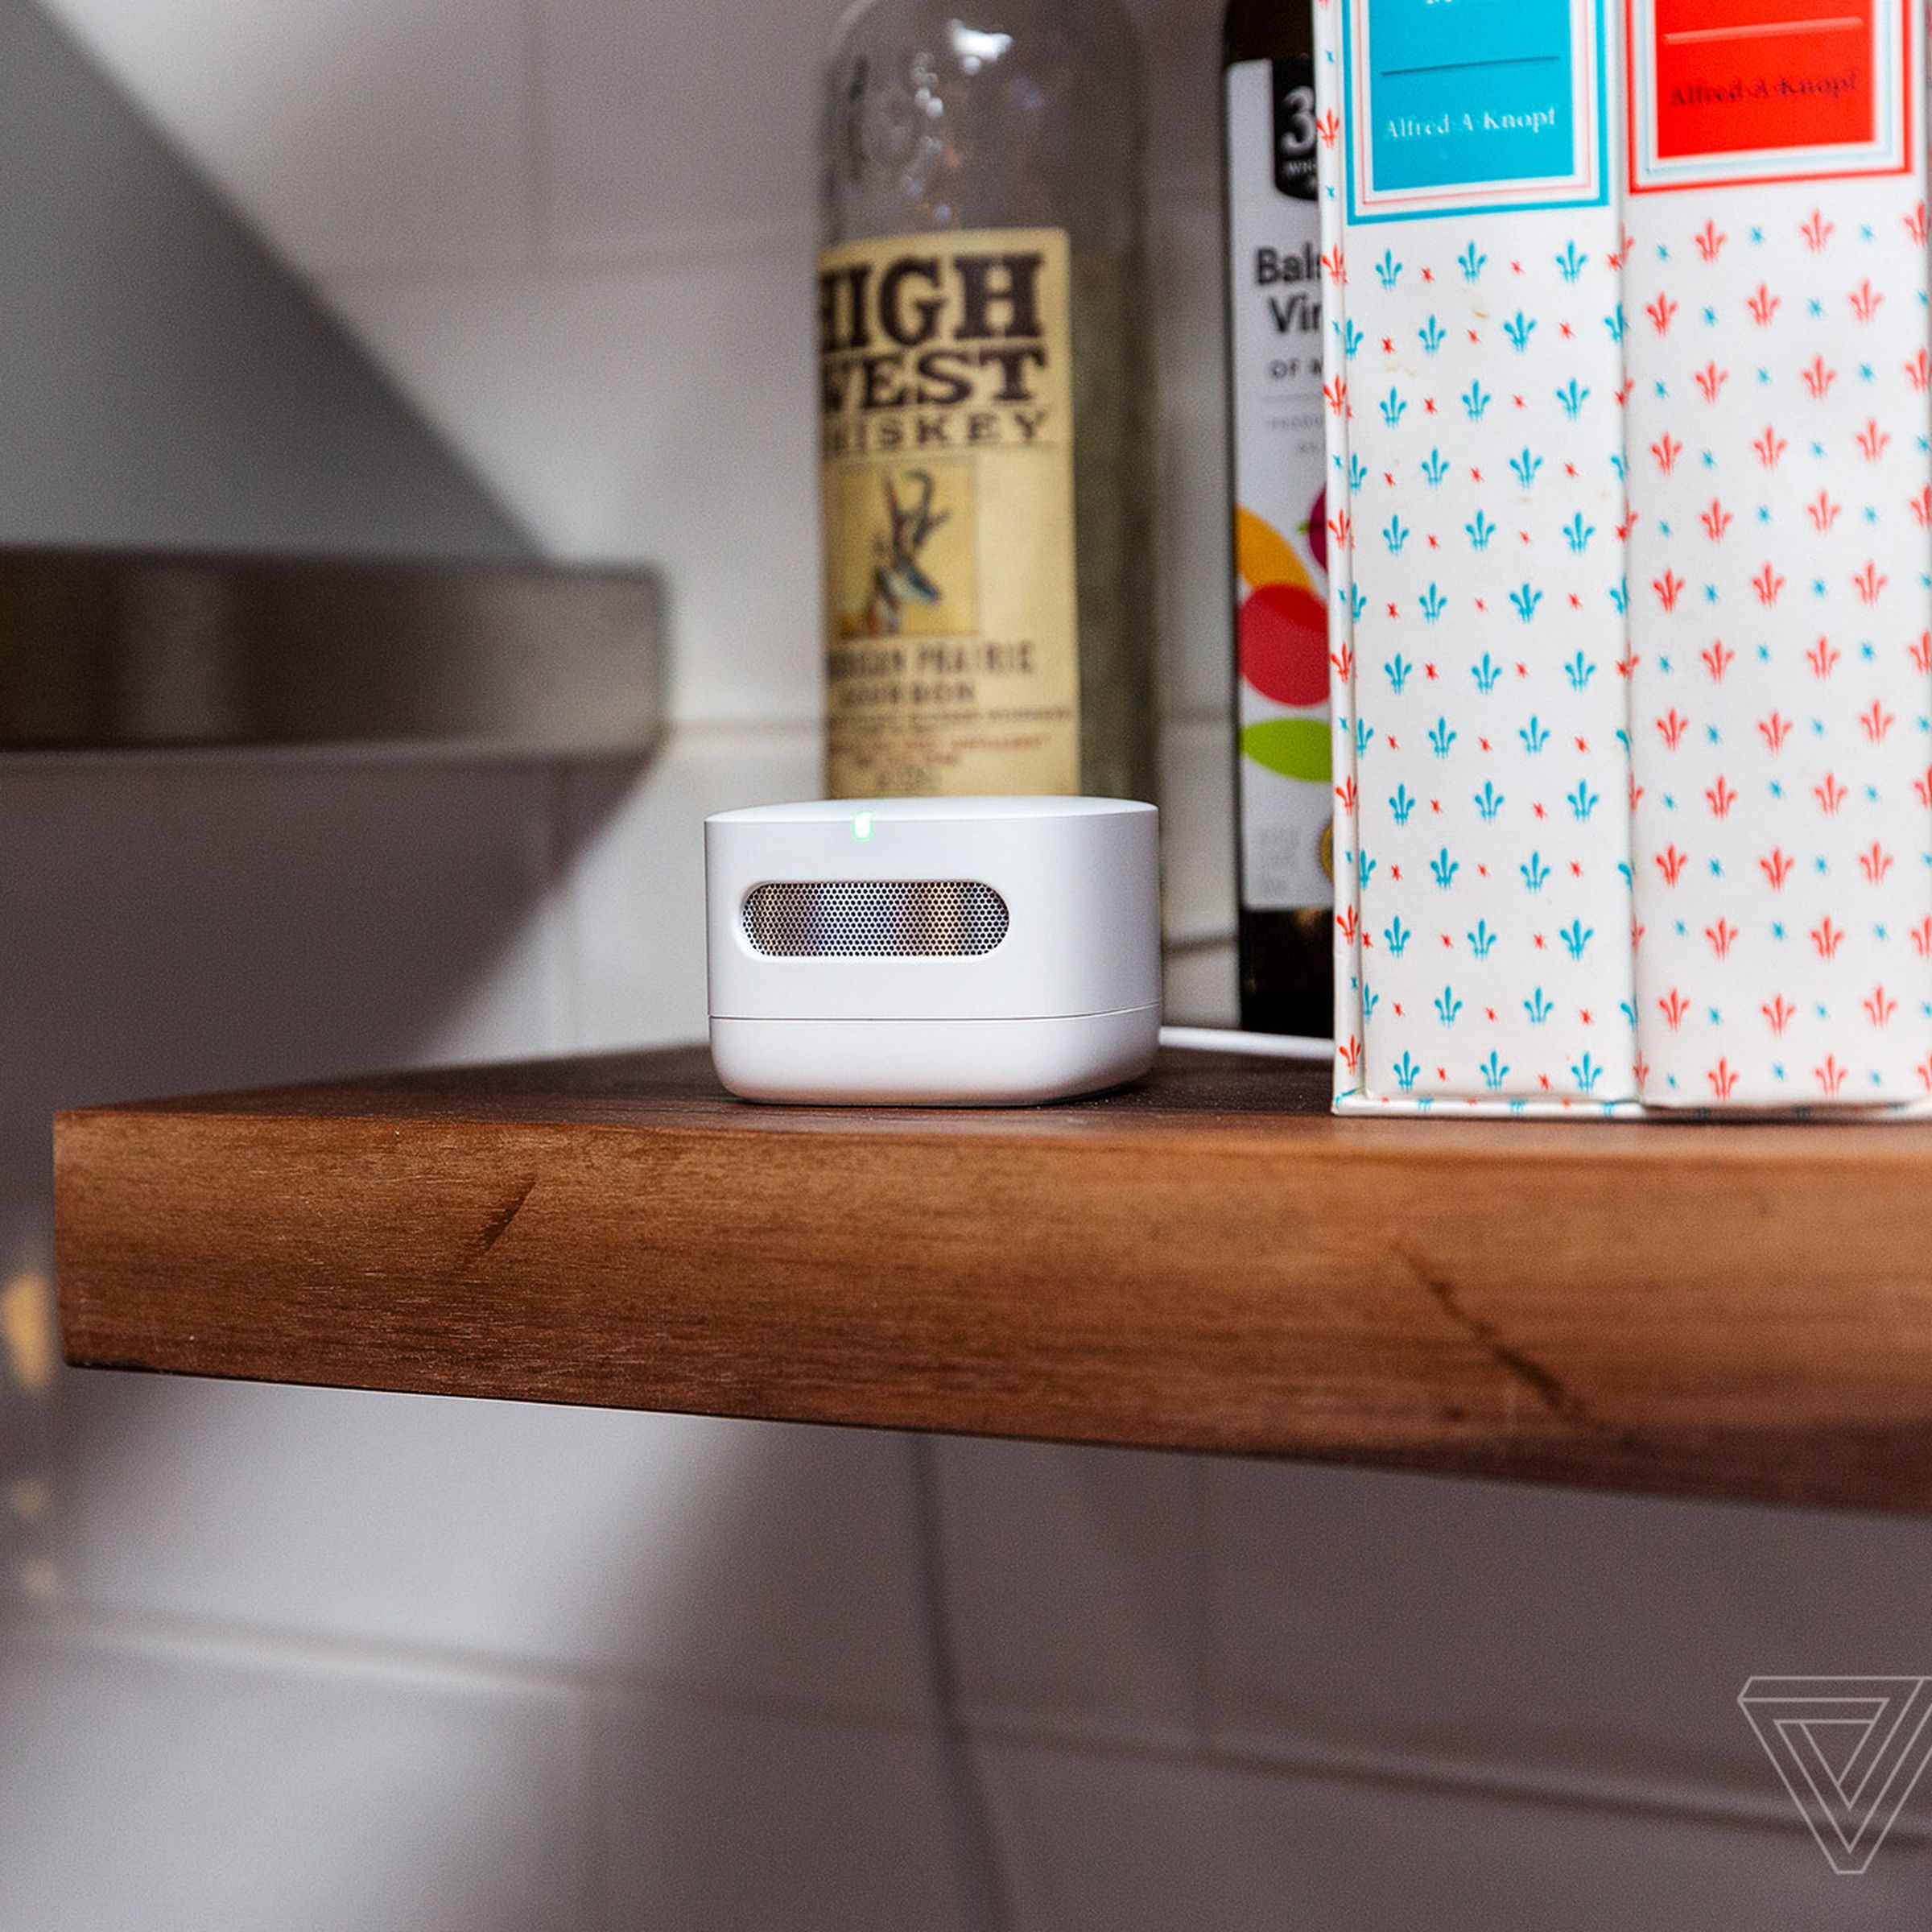 The Amazon Smart Air Quality Monitor keeps track of indoor air quality.